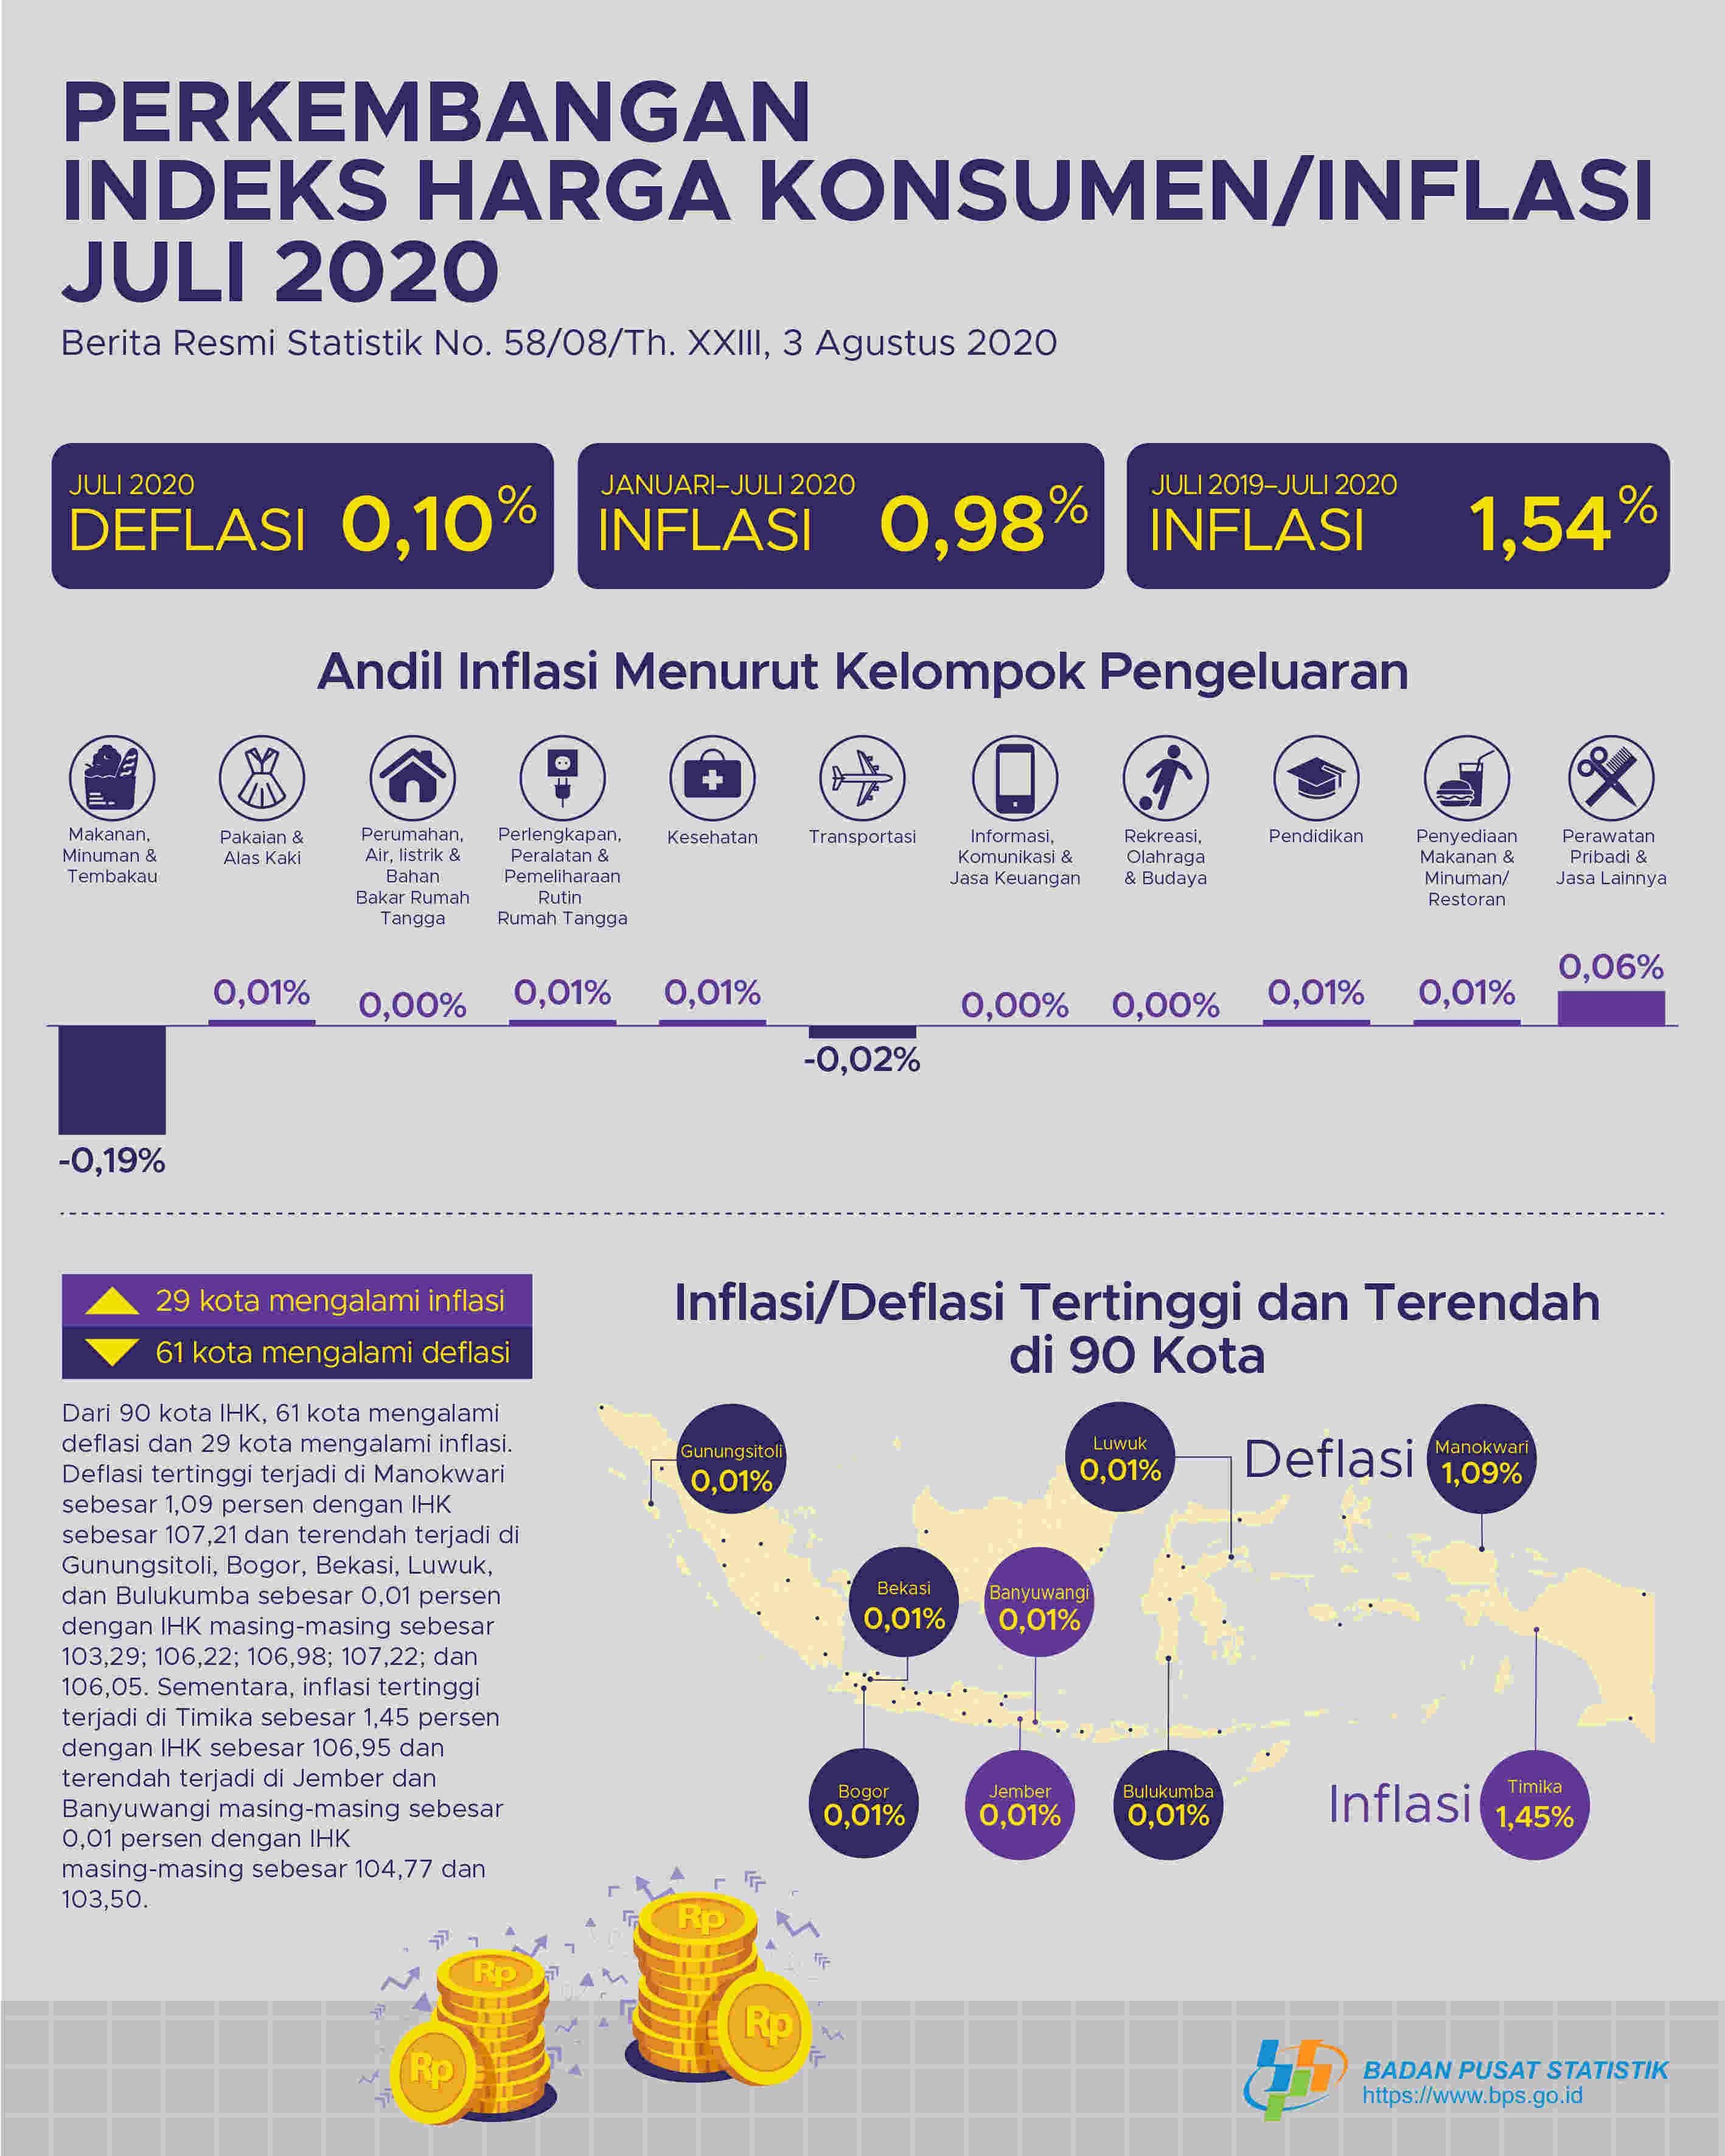 Deflation in July 2020 was 0.10 percent. The highest deflation occured in Manokwari at 1.09 percent.